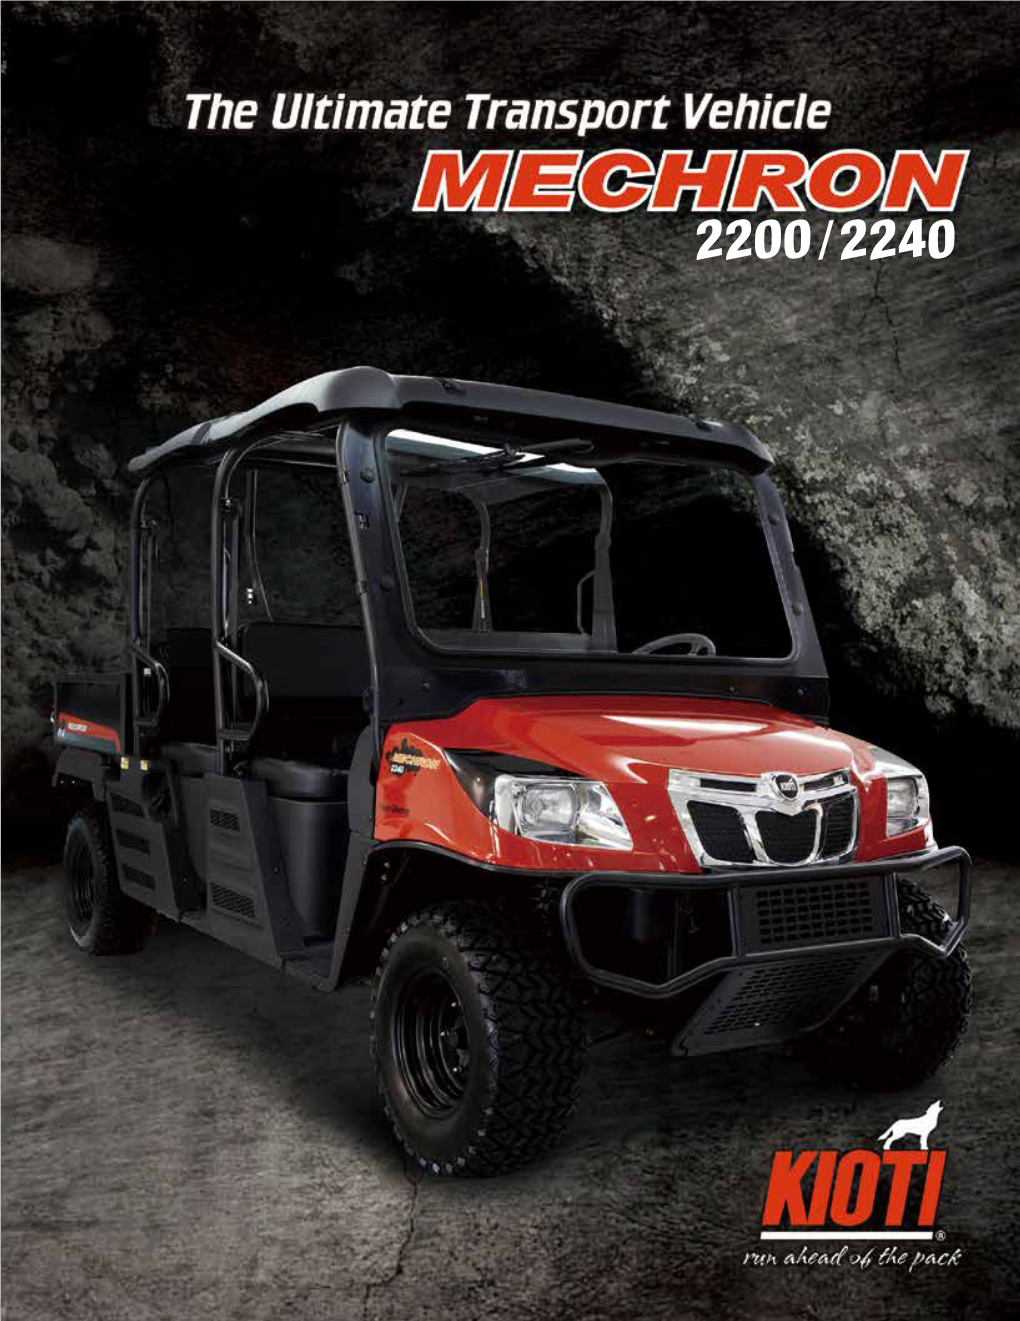 The MECHRON Whether You Need a Worker on the Farm Or a Way Into the Woods, the KIOTI MECHRON 4X4 Utility Vehicle Gets All Your Jobs Done